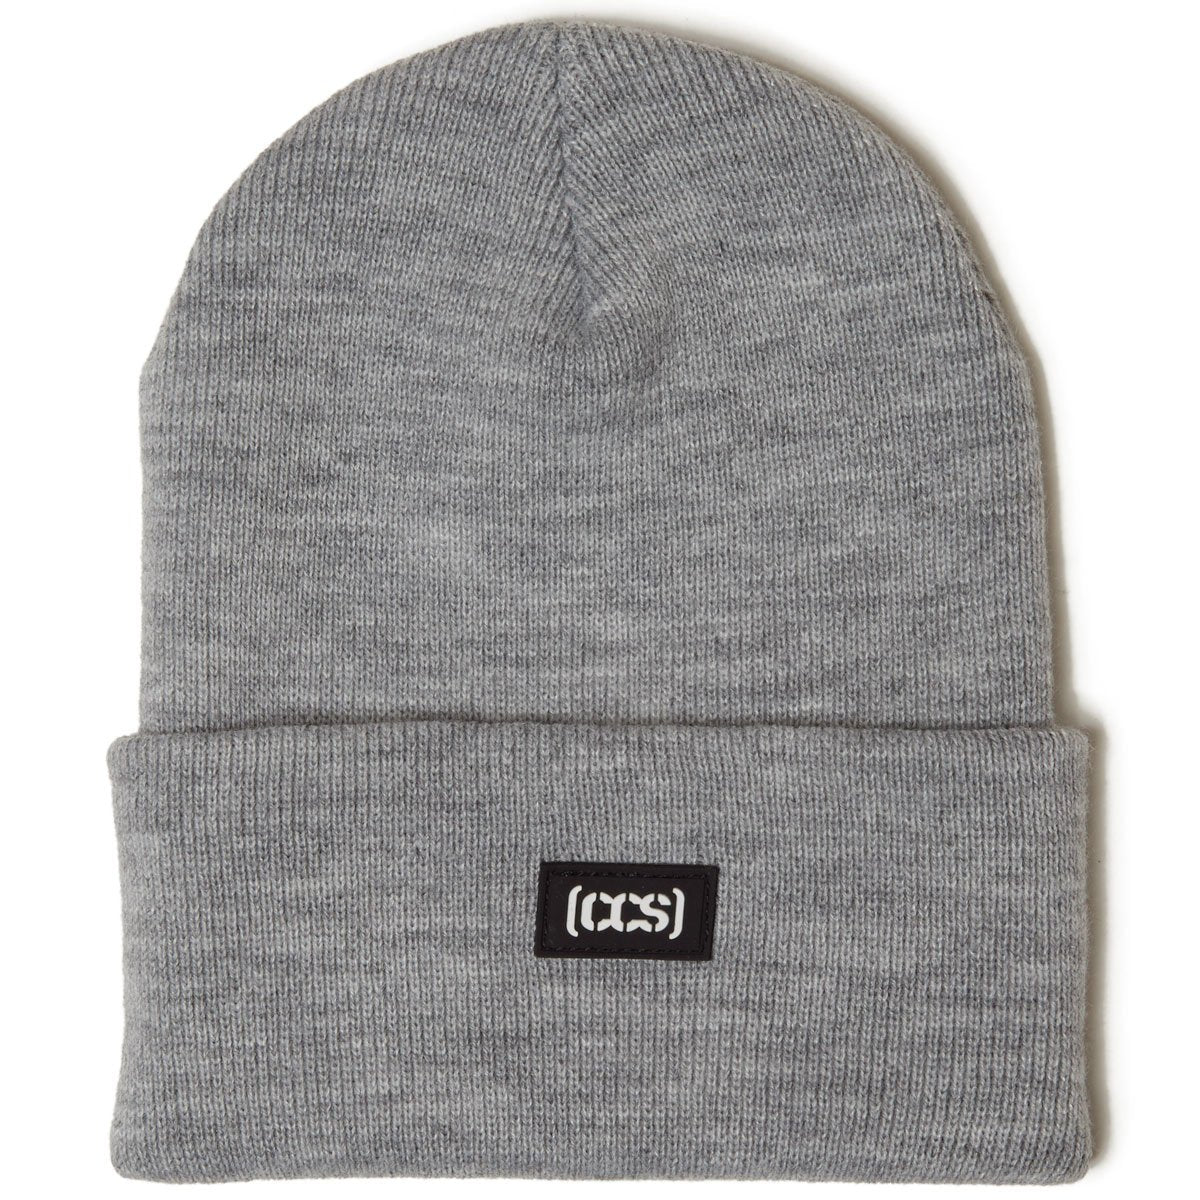 CCS Rubber Logo Patch Beanie - Heather Grey image 1